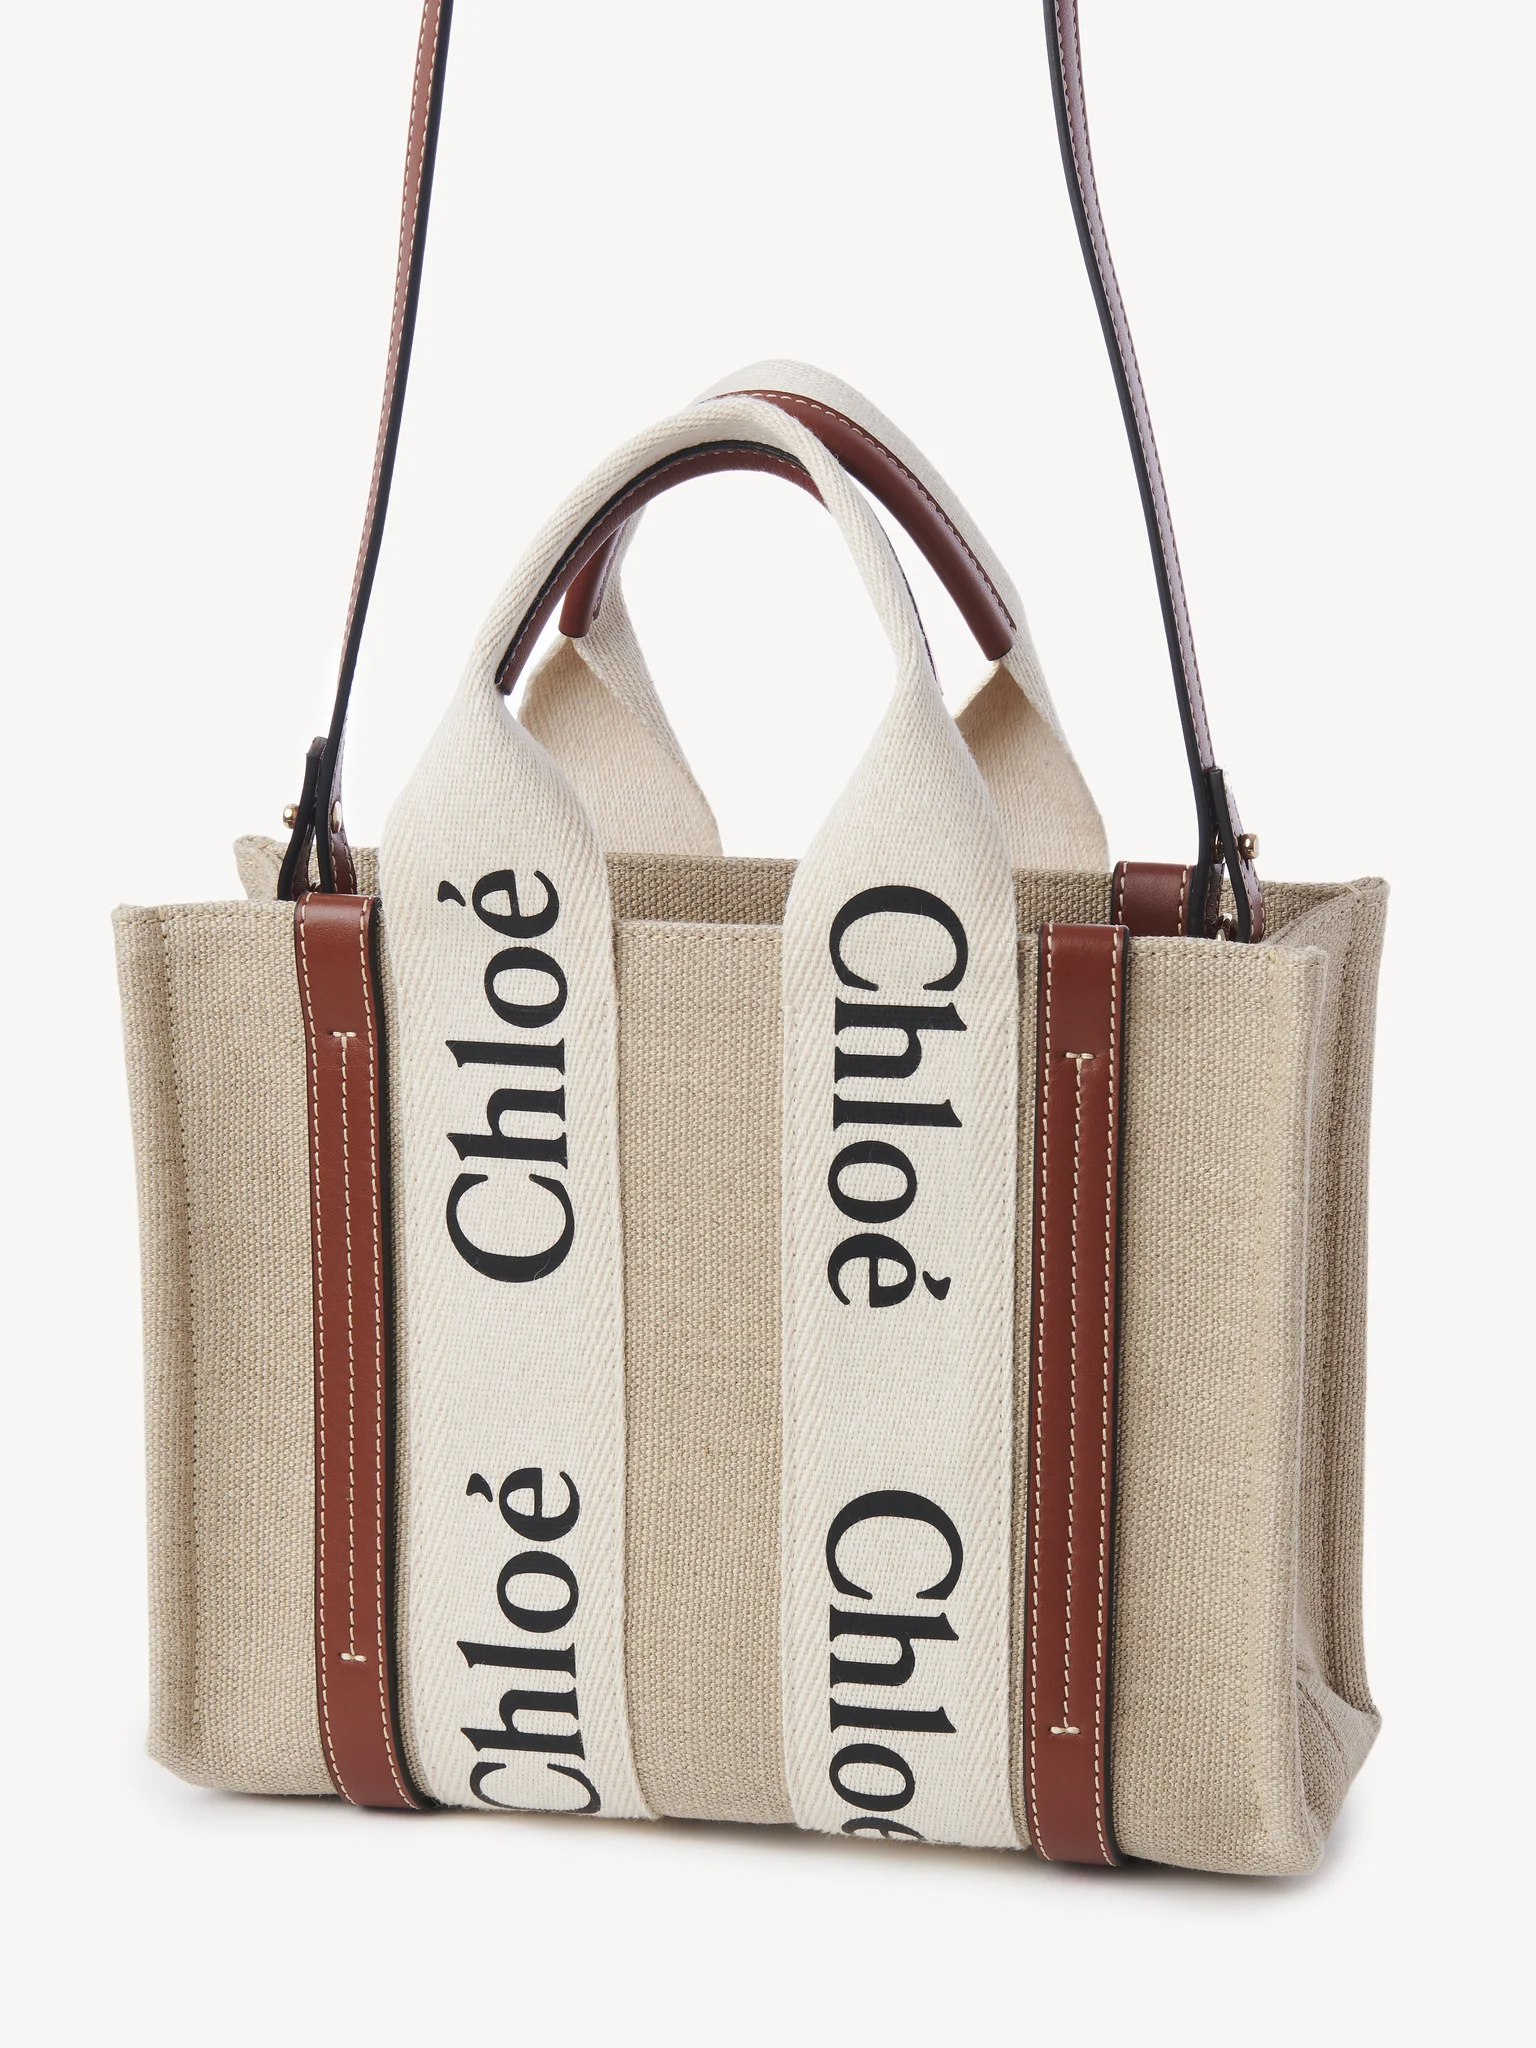 Chloe-Woody-Small-Tote-With-Strap-White-Brown-The-New-Trend-Default